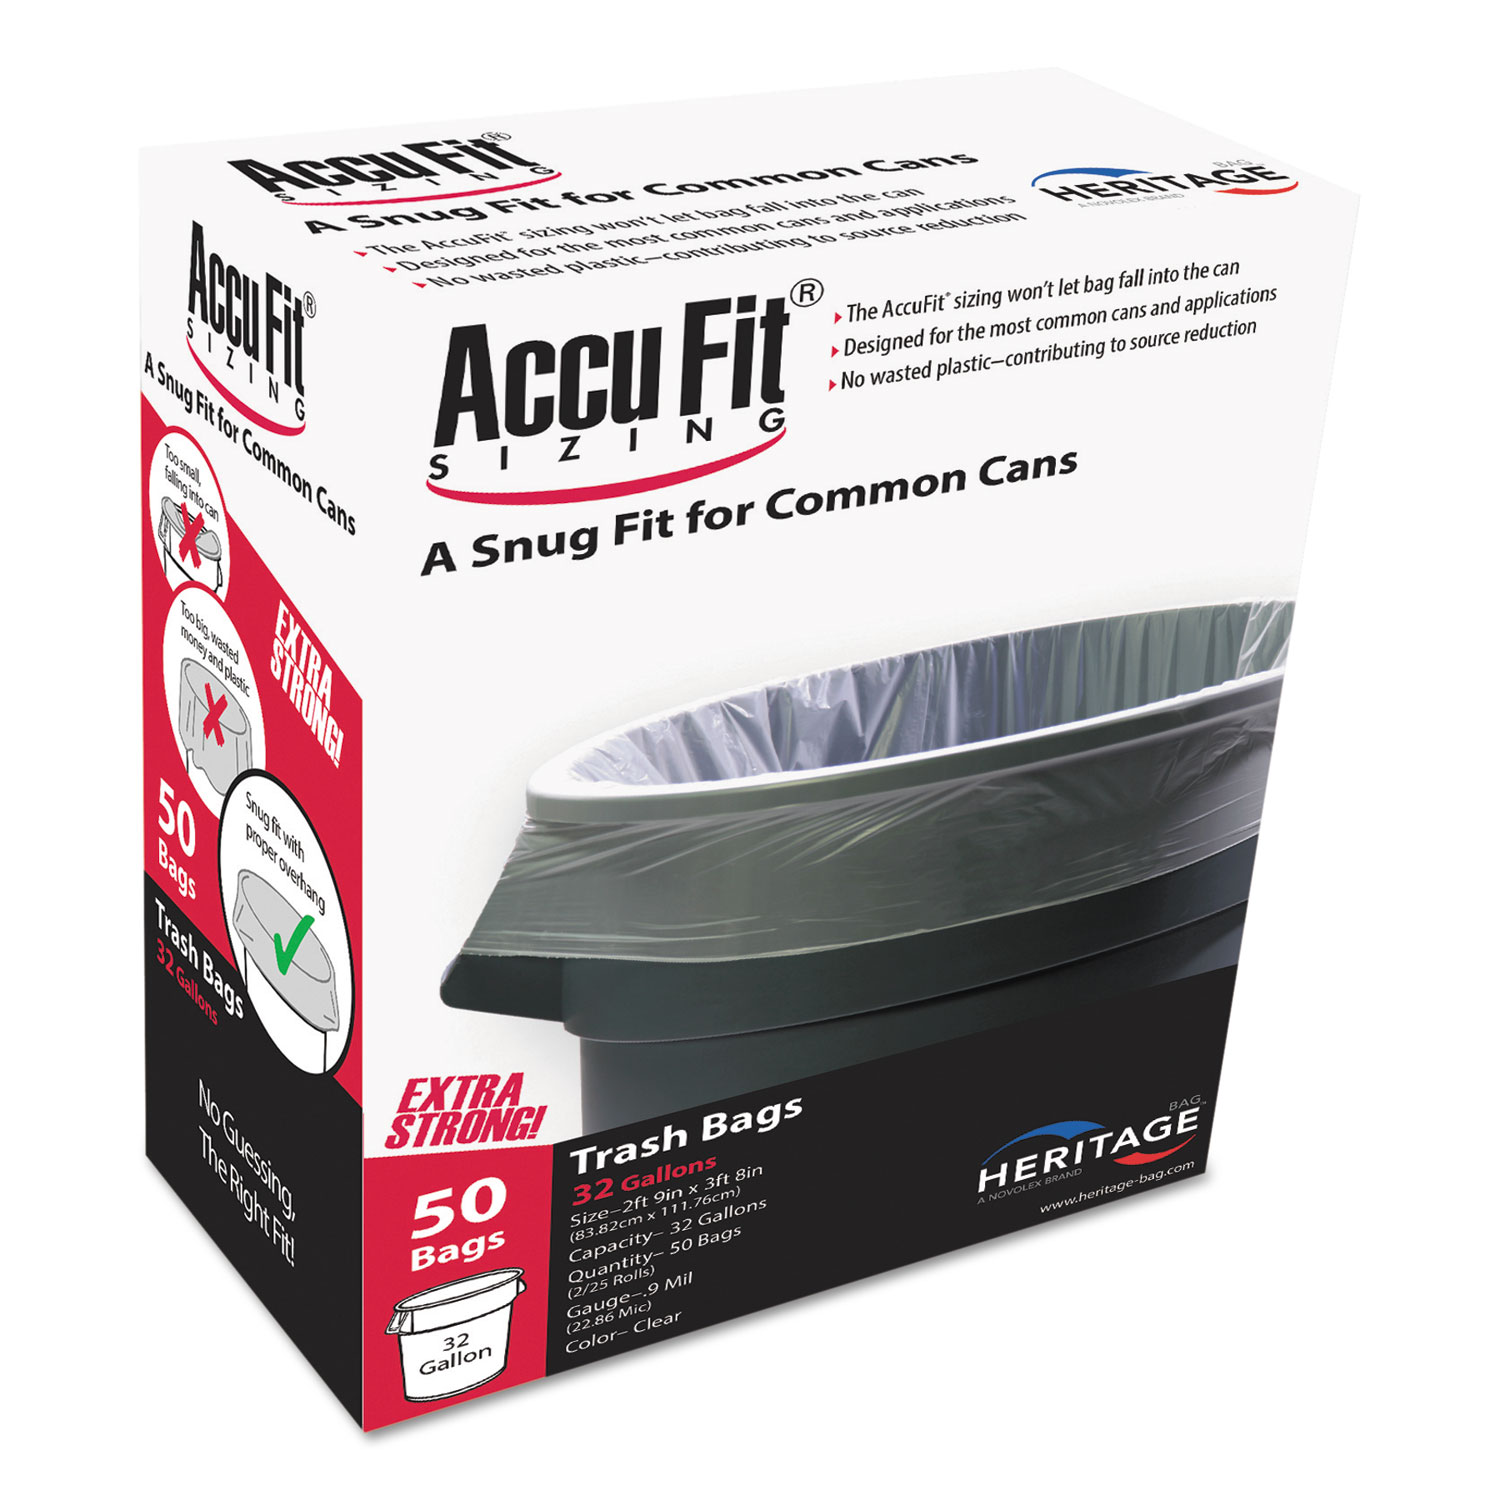  AccuFit H8053TC RC1 Linear Low Density Can Liners with AccuFit Sizing, 55 gal, 0.9 mil, 40 x 53, Clear, 50/Box (HERH8053TCRC1) 